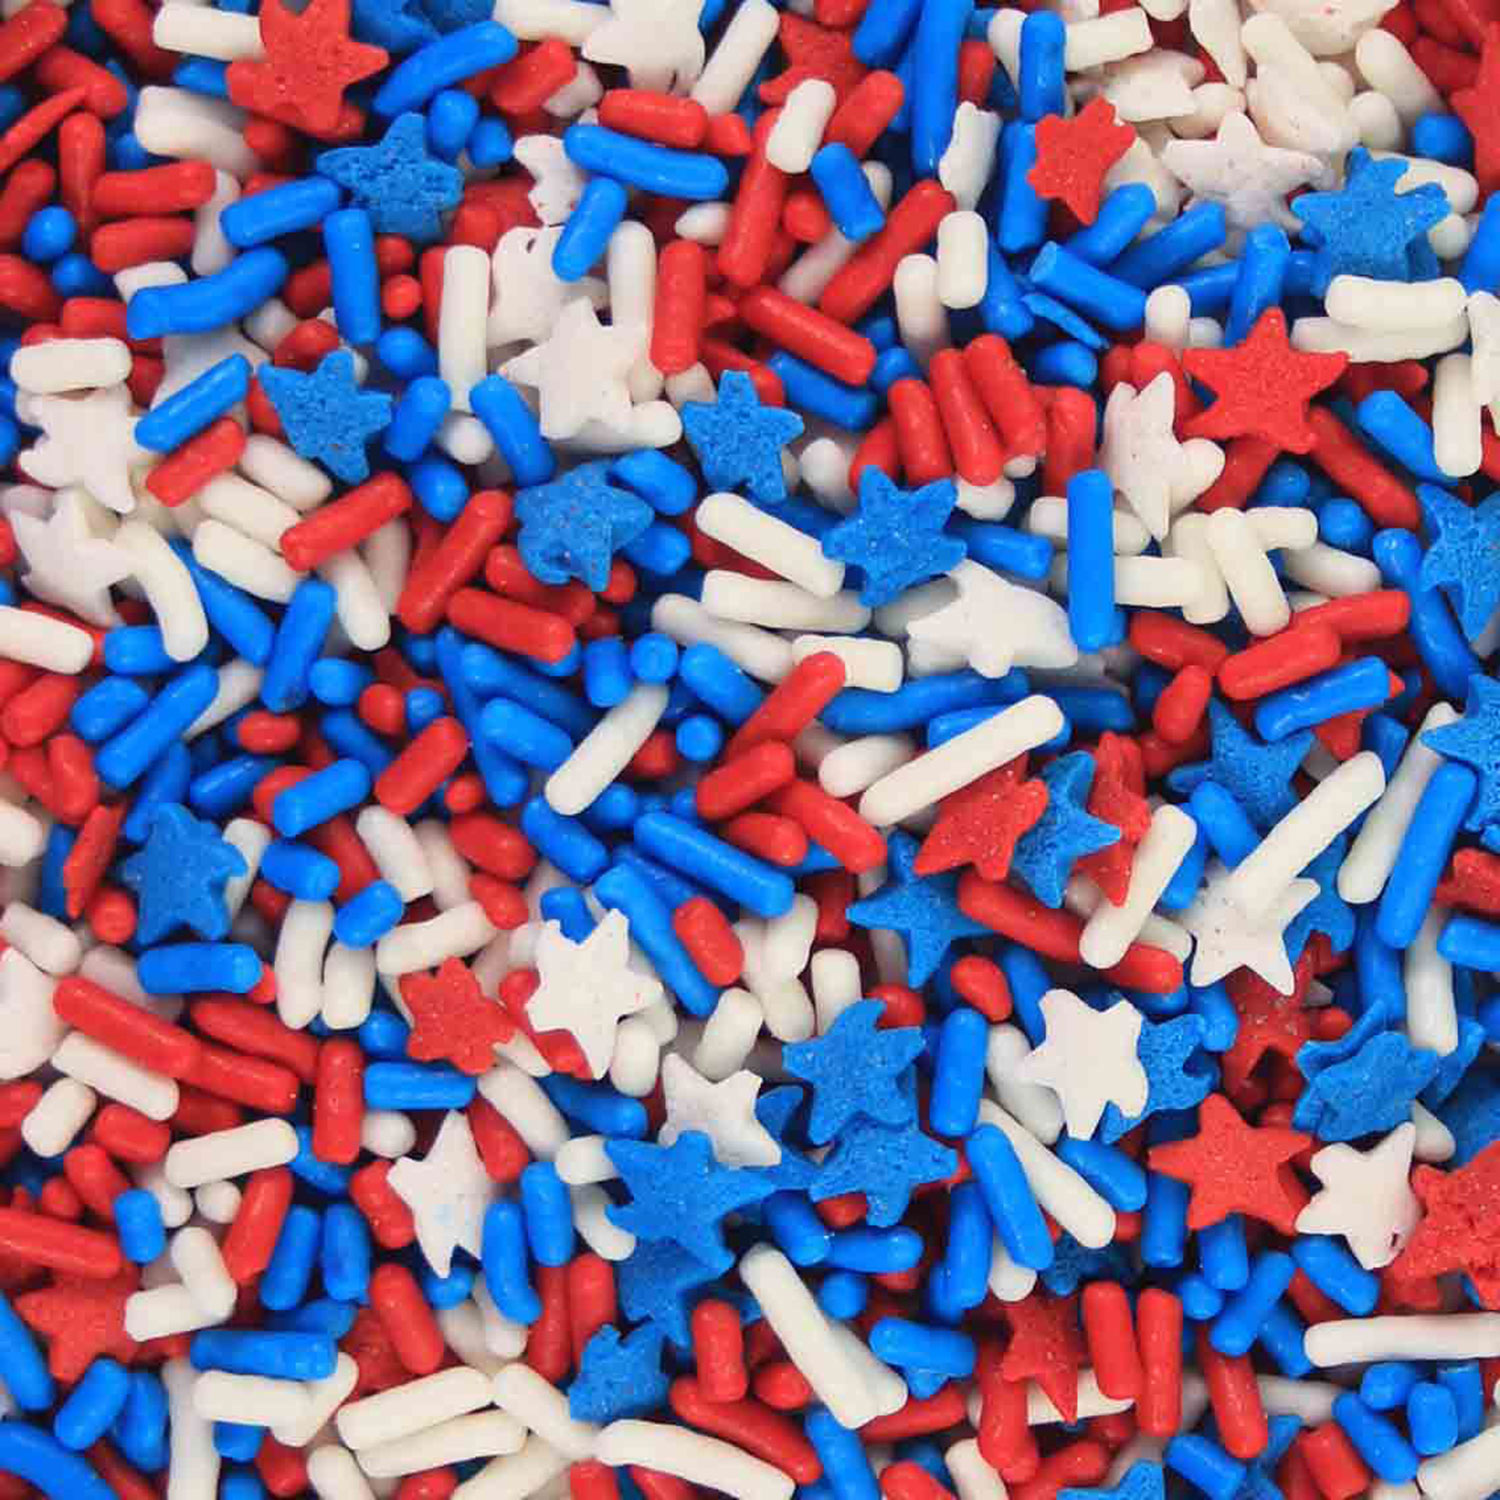 Stars and Stripes Sprinkle Mix